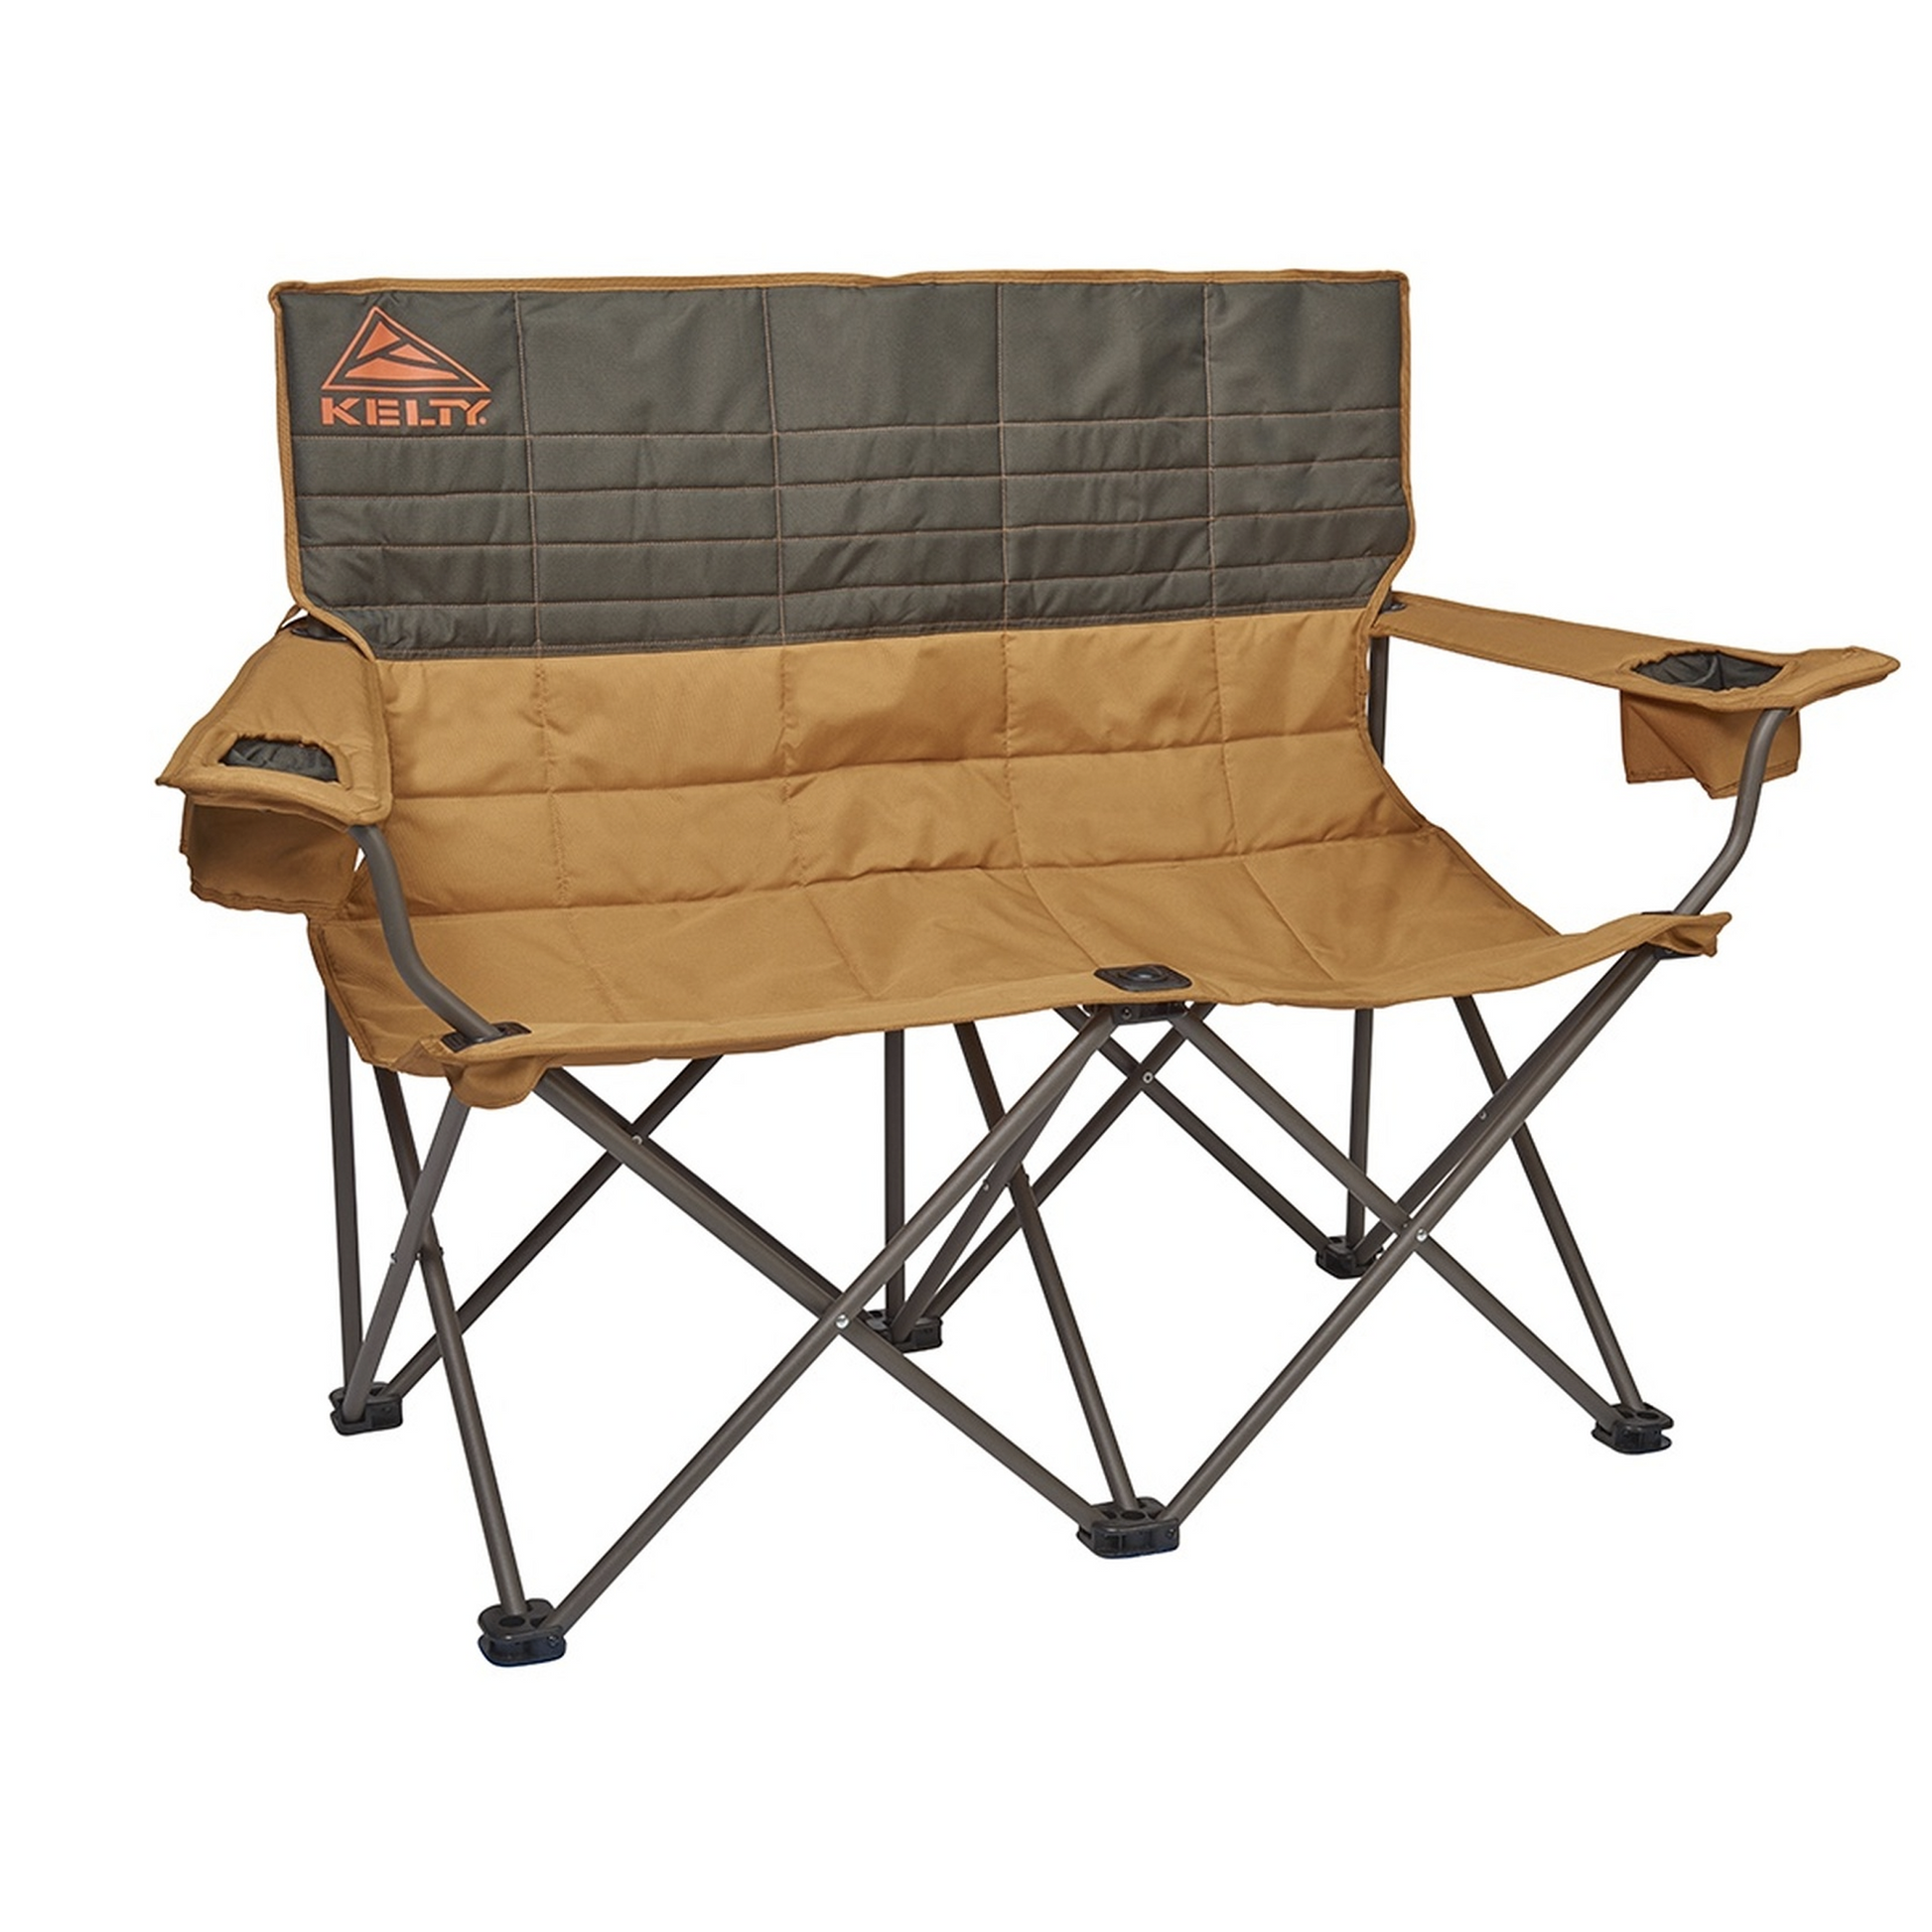 Kelty Loveseat Big Adventure Outfitters